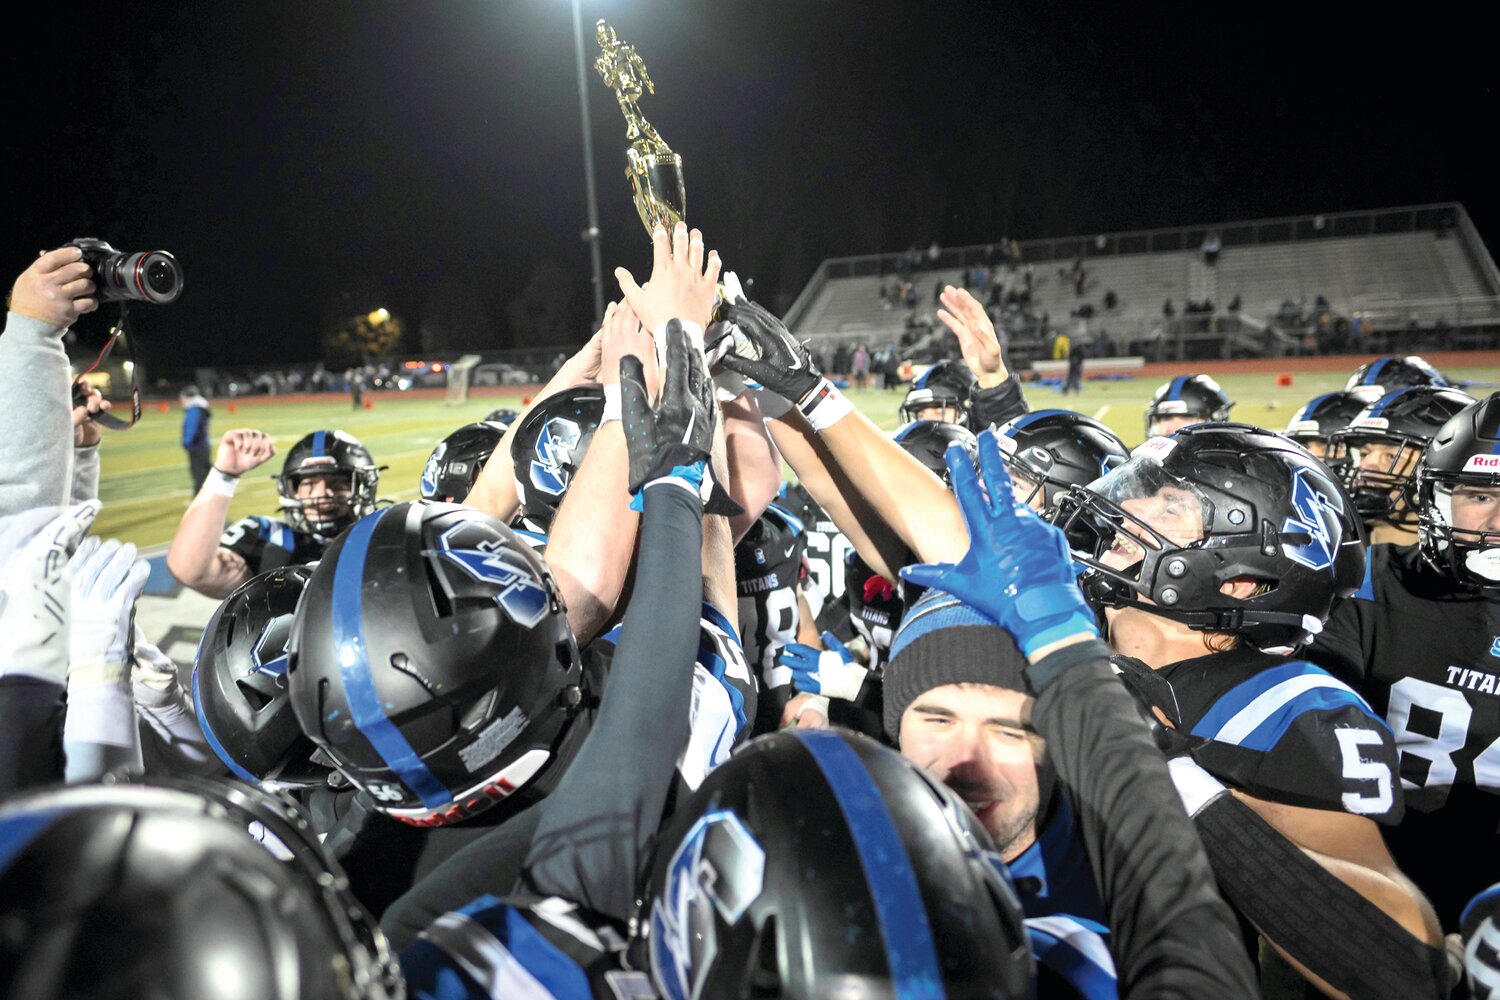 Members of the Central Bucks South football team hoist the District One Class 6A trophy after defeating Downingtown West 27-7 Friday night in Warrington.